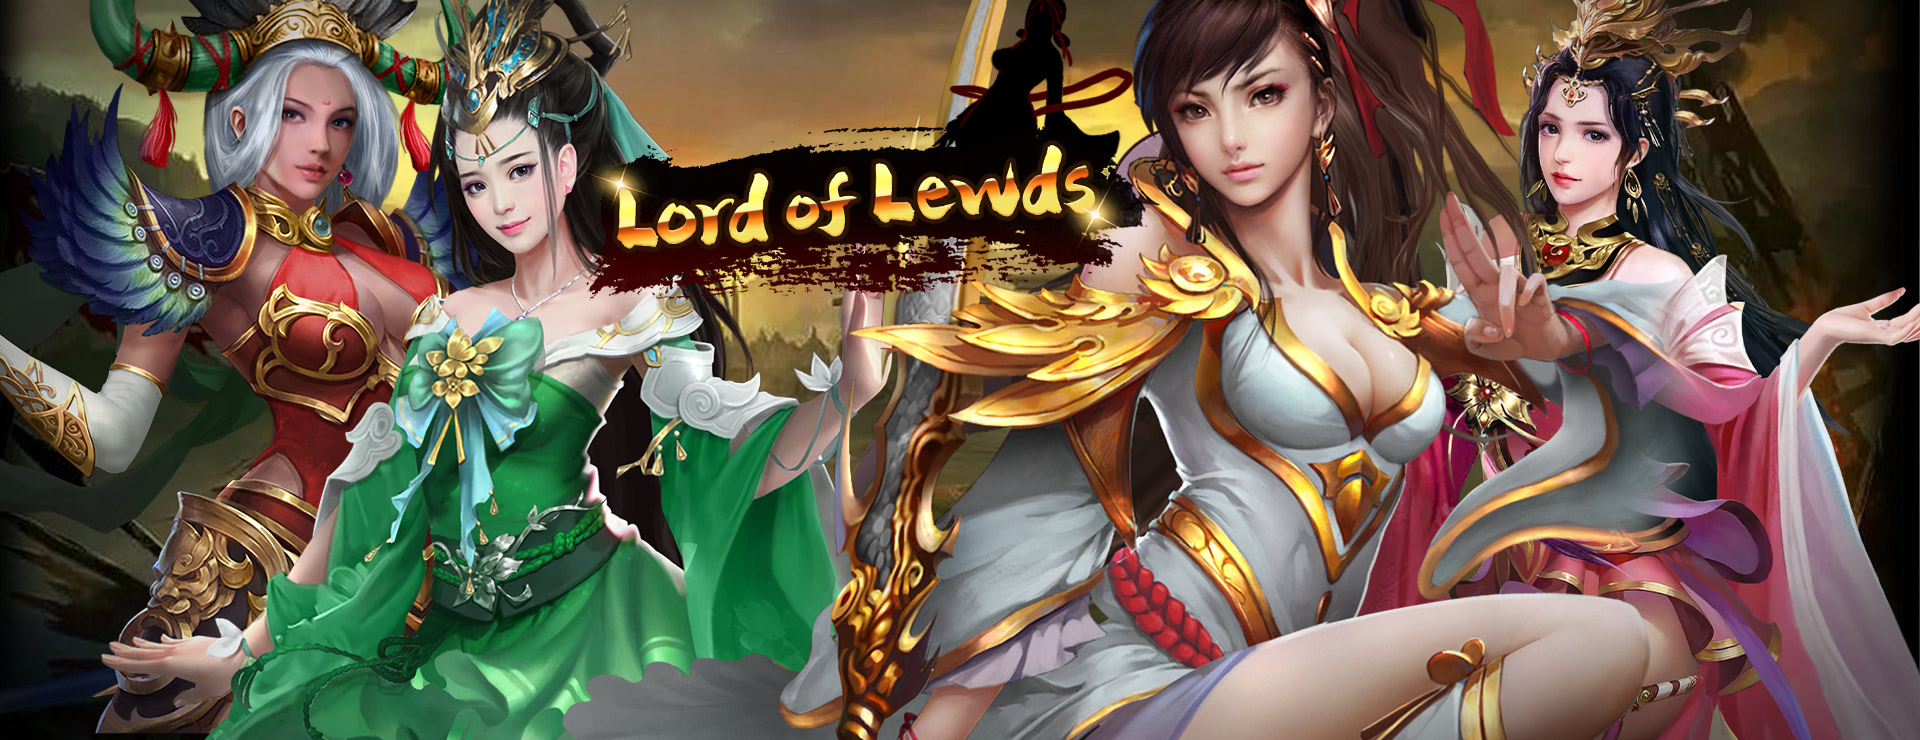 Lord of Lewds Game - 战略 遊戲